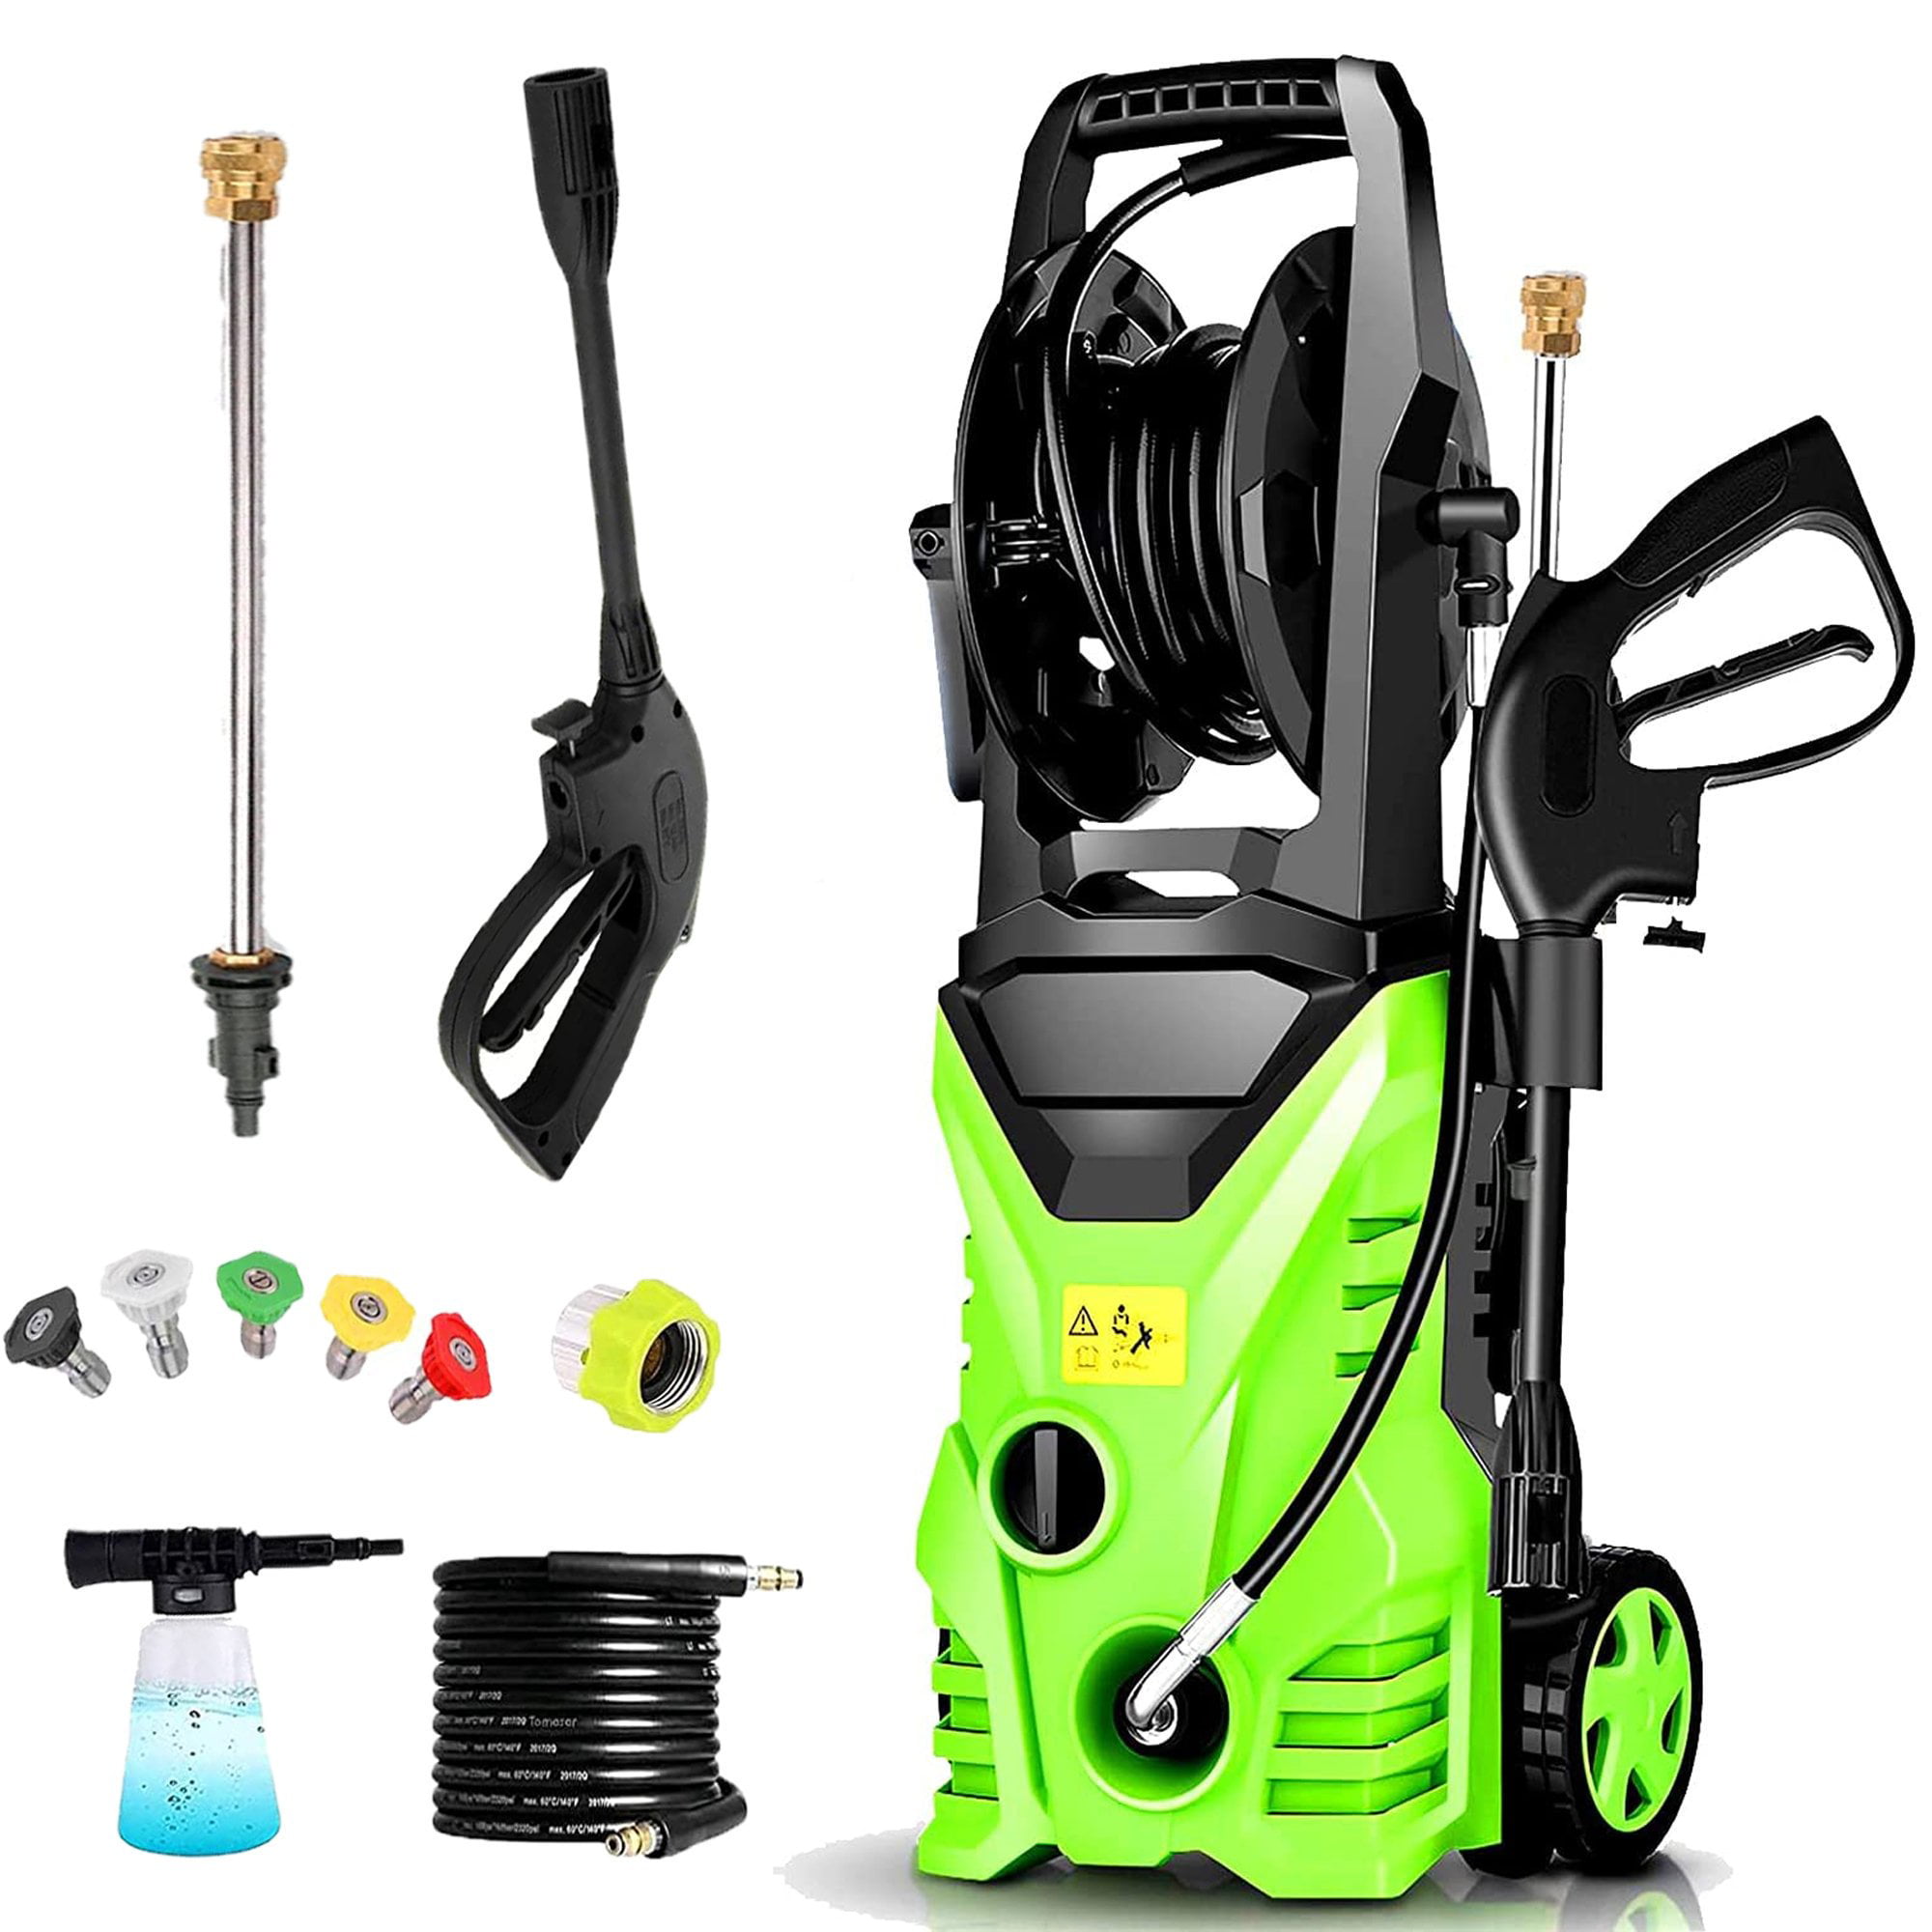 Newest 3000PSI 1.8GPM Electric Pressure Washer High Power Water Cleaner Sprayer*